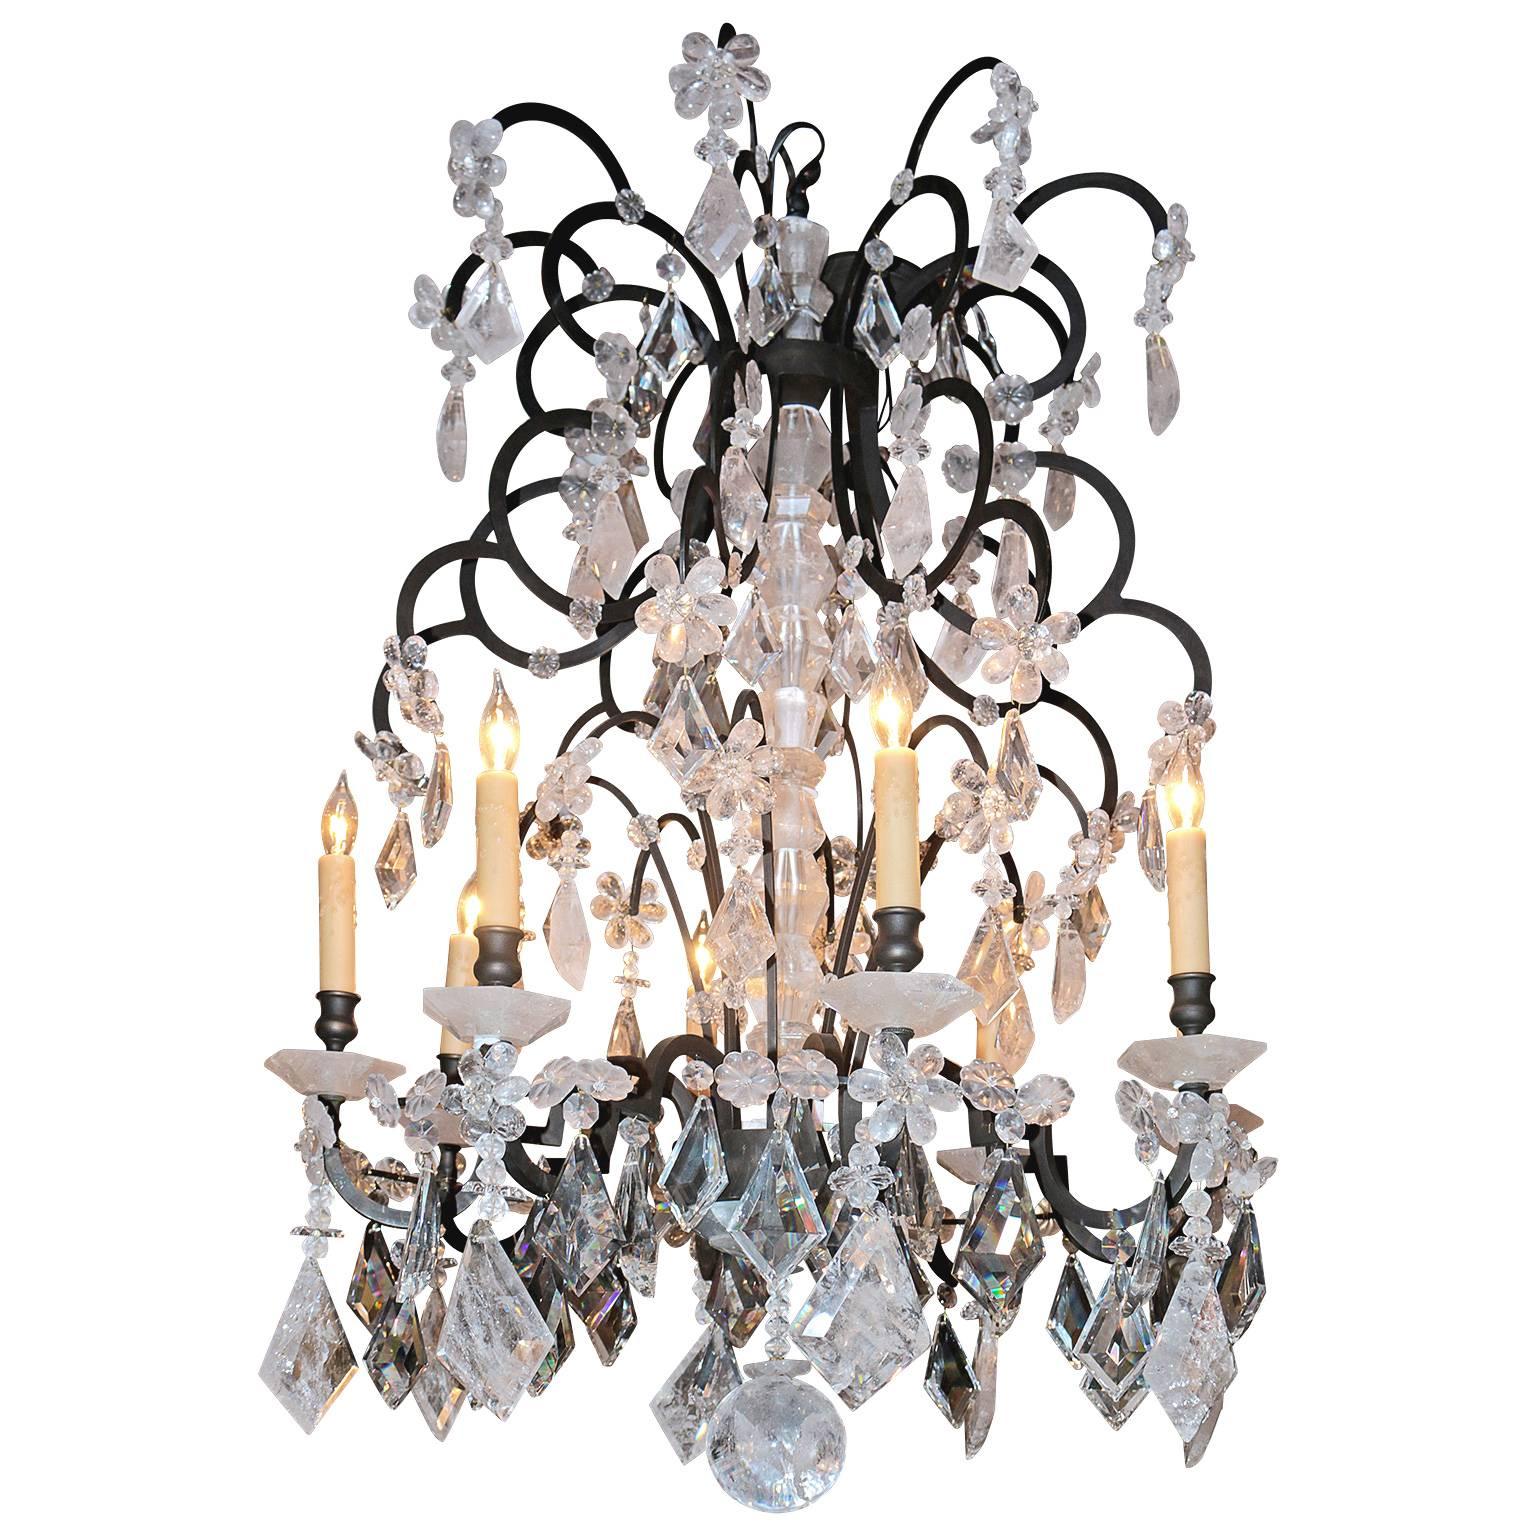 Pair of Impressive rock crystal chandeliers in good used condition. Rock crystal bobeche chandelier have a subtle touch of smaller crystals. The column of this chandelier is made entirely of rock crystal and is connecting the top tier to the bottom